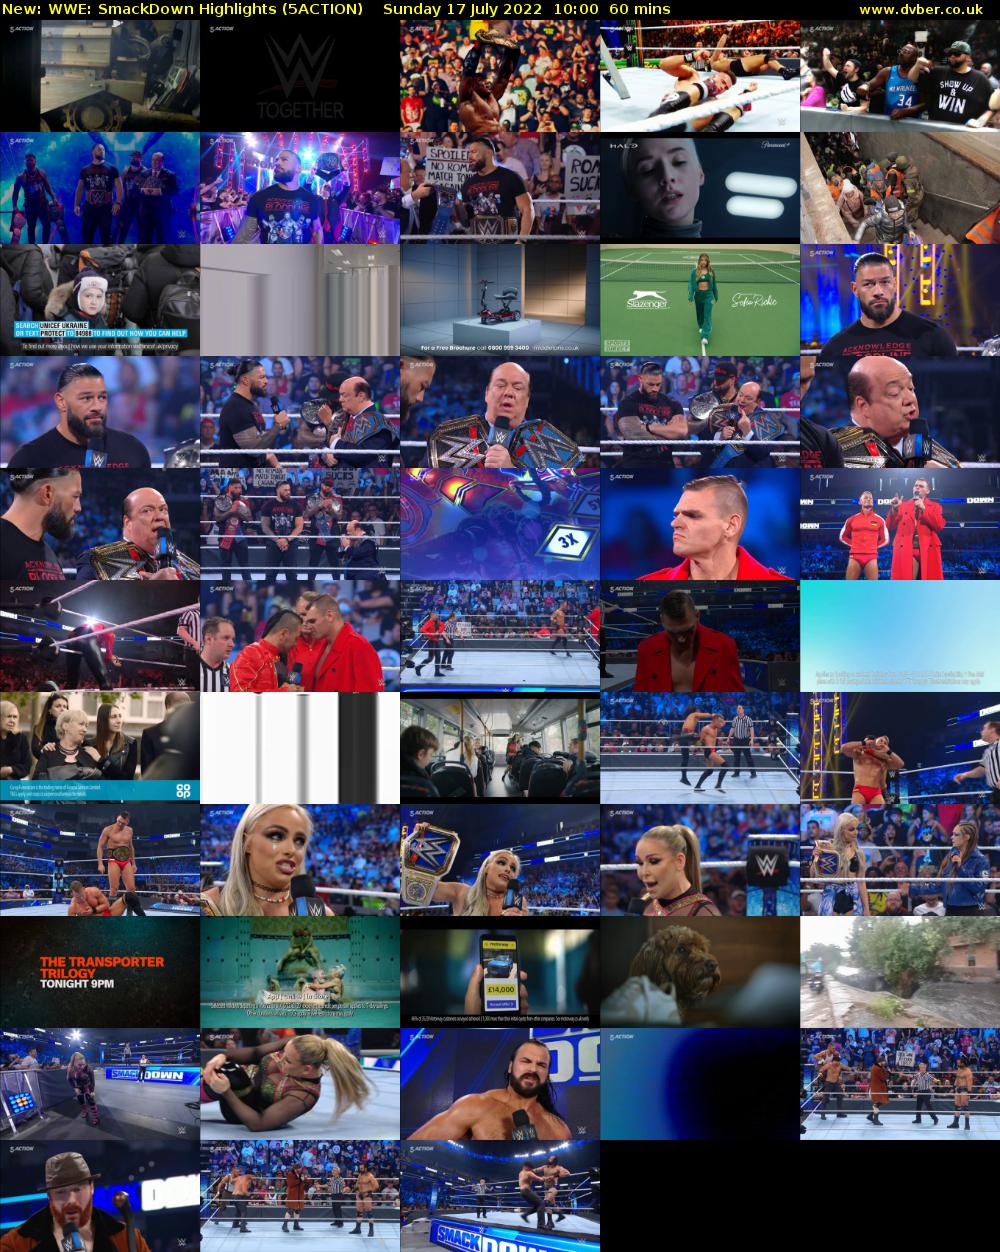 WWE: SmackDown Highlights (5ACTION) Sunday 17 July 2022 10:00 - 11:00